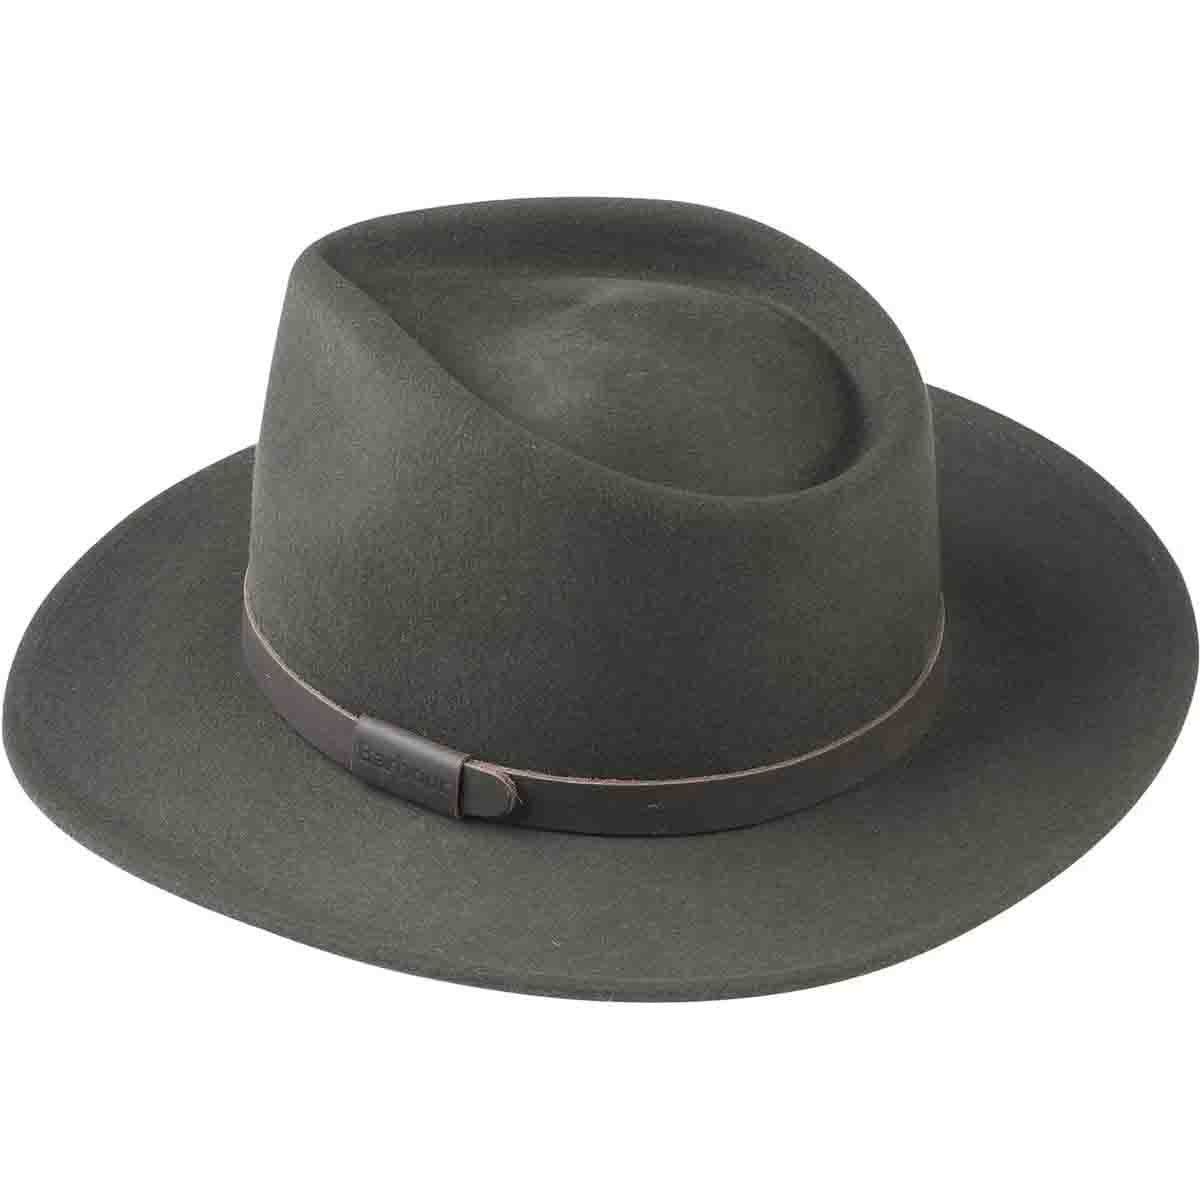 Barbour Crushable Bushman Hat in Olive